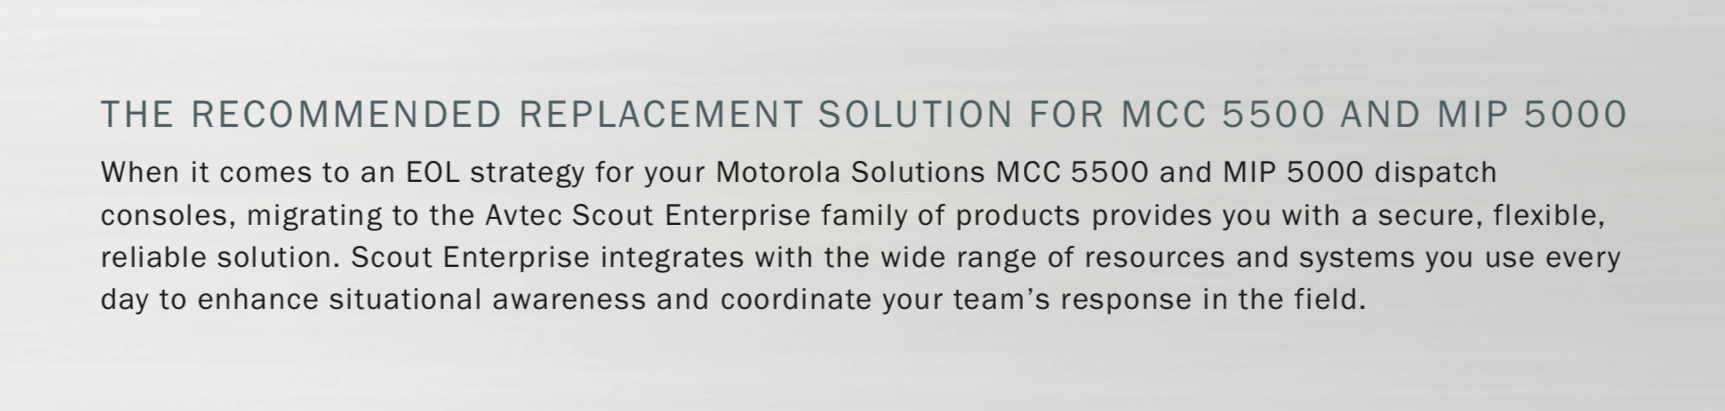 The recommended replacement solution for MCC 5500 and MIP 5000